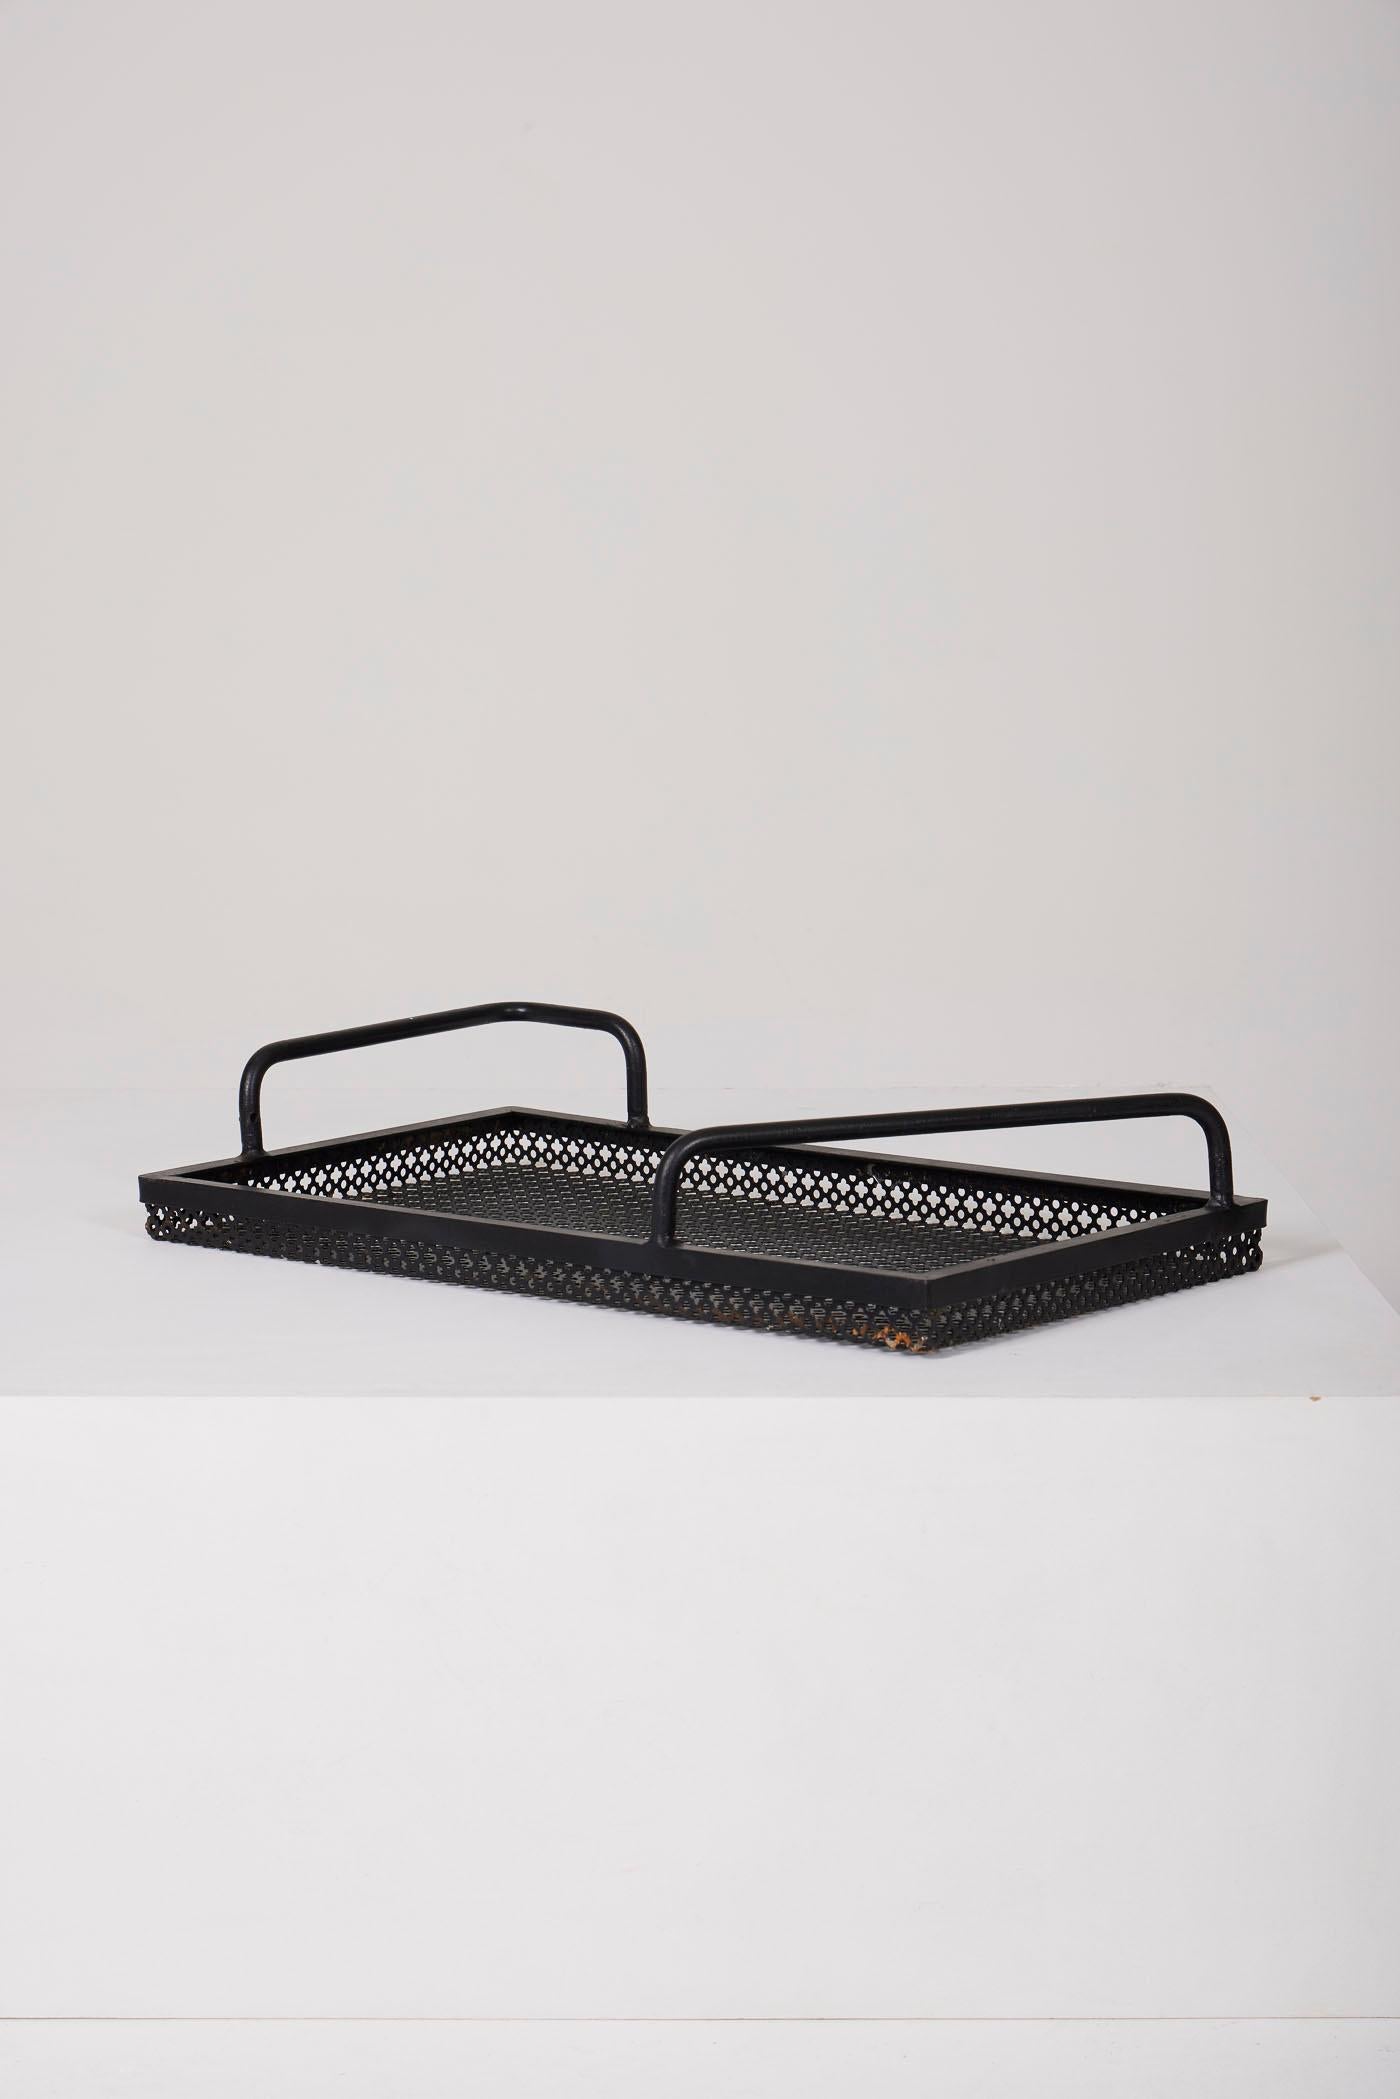 Perforated black lacquered metal tray in the style of French designer Mathieu Matégot, from the 1960s. In perfect condition.
DV361